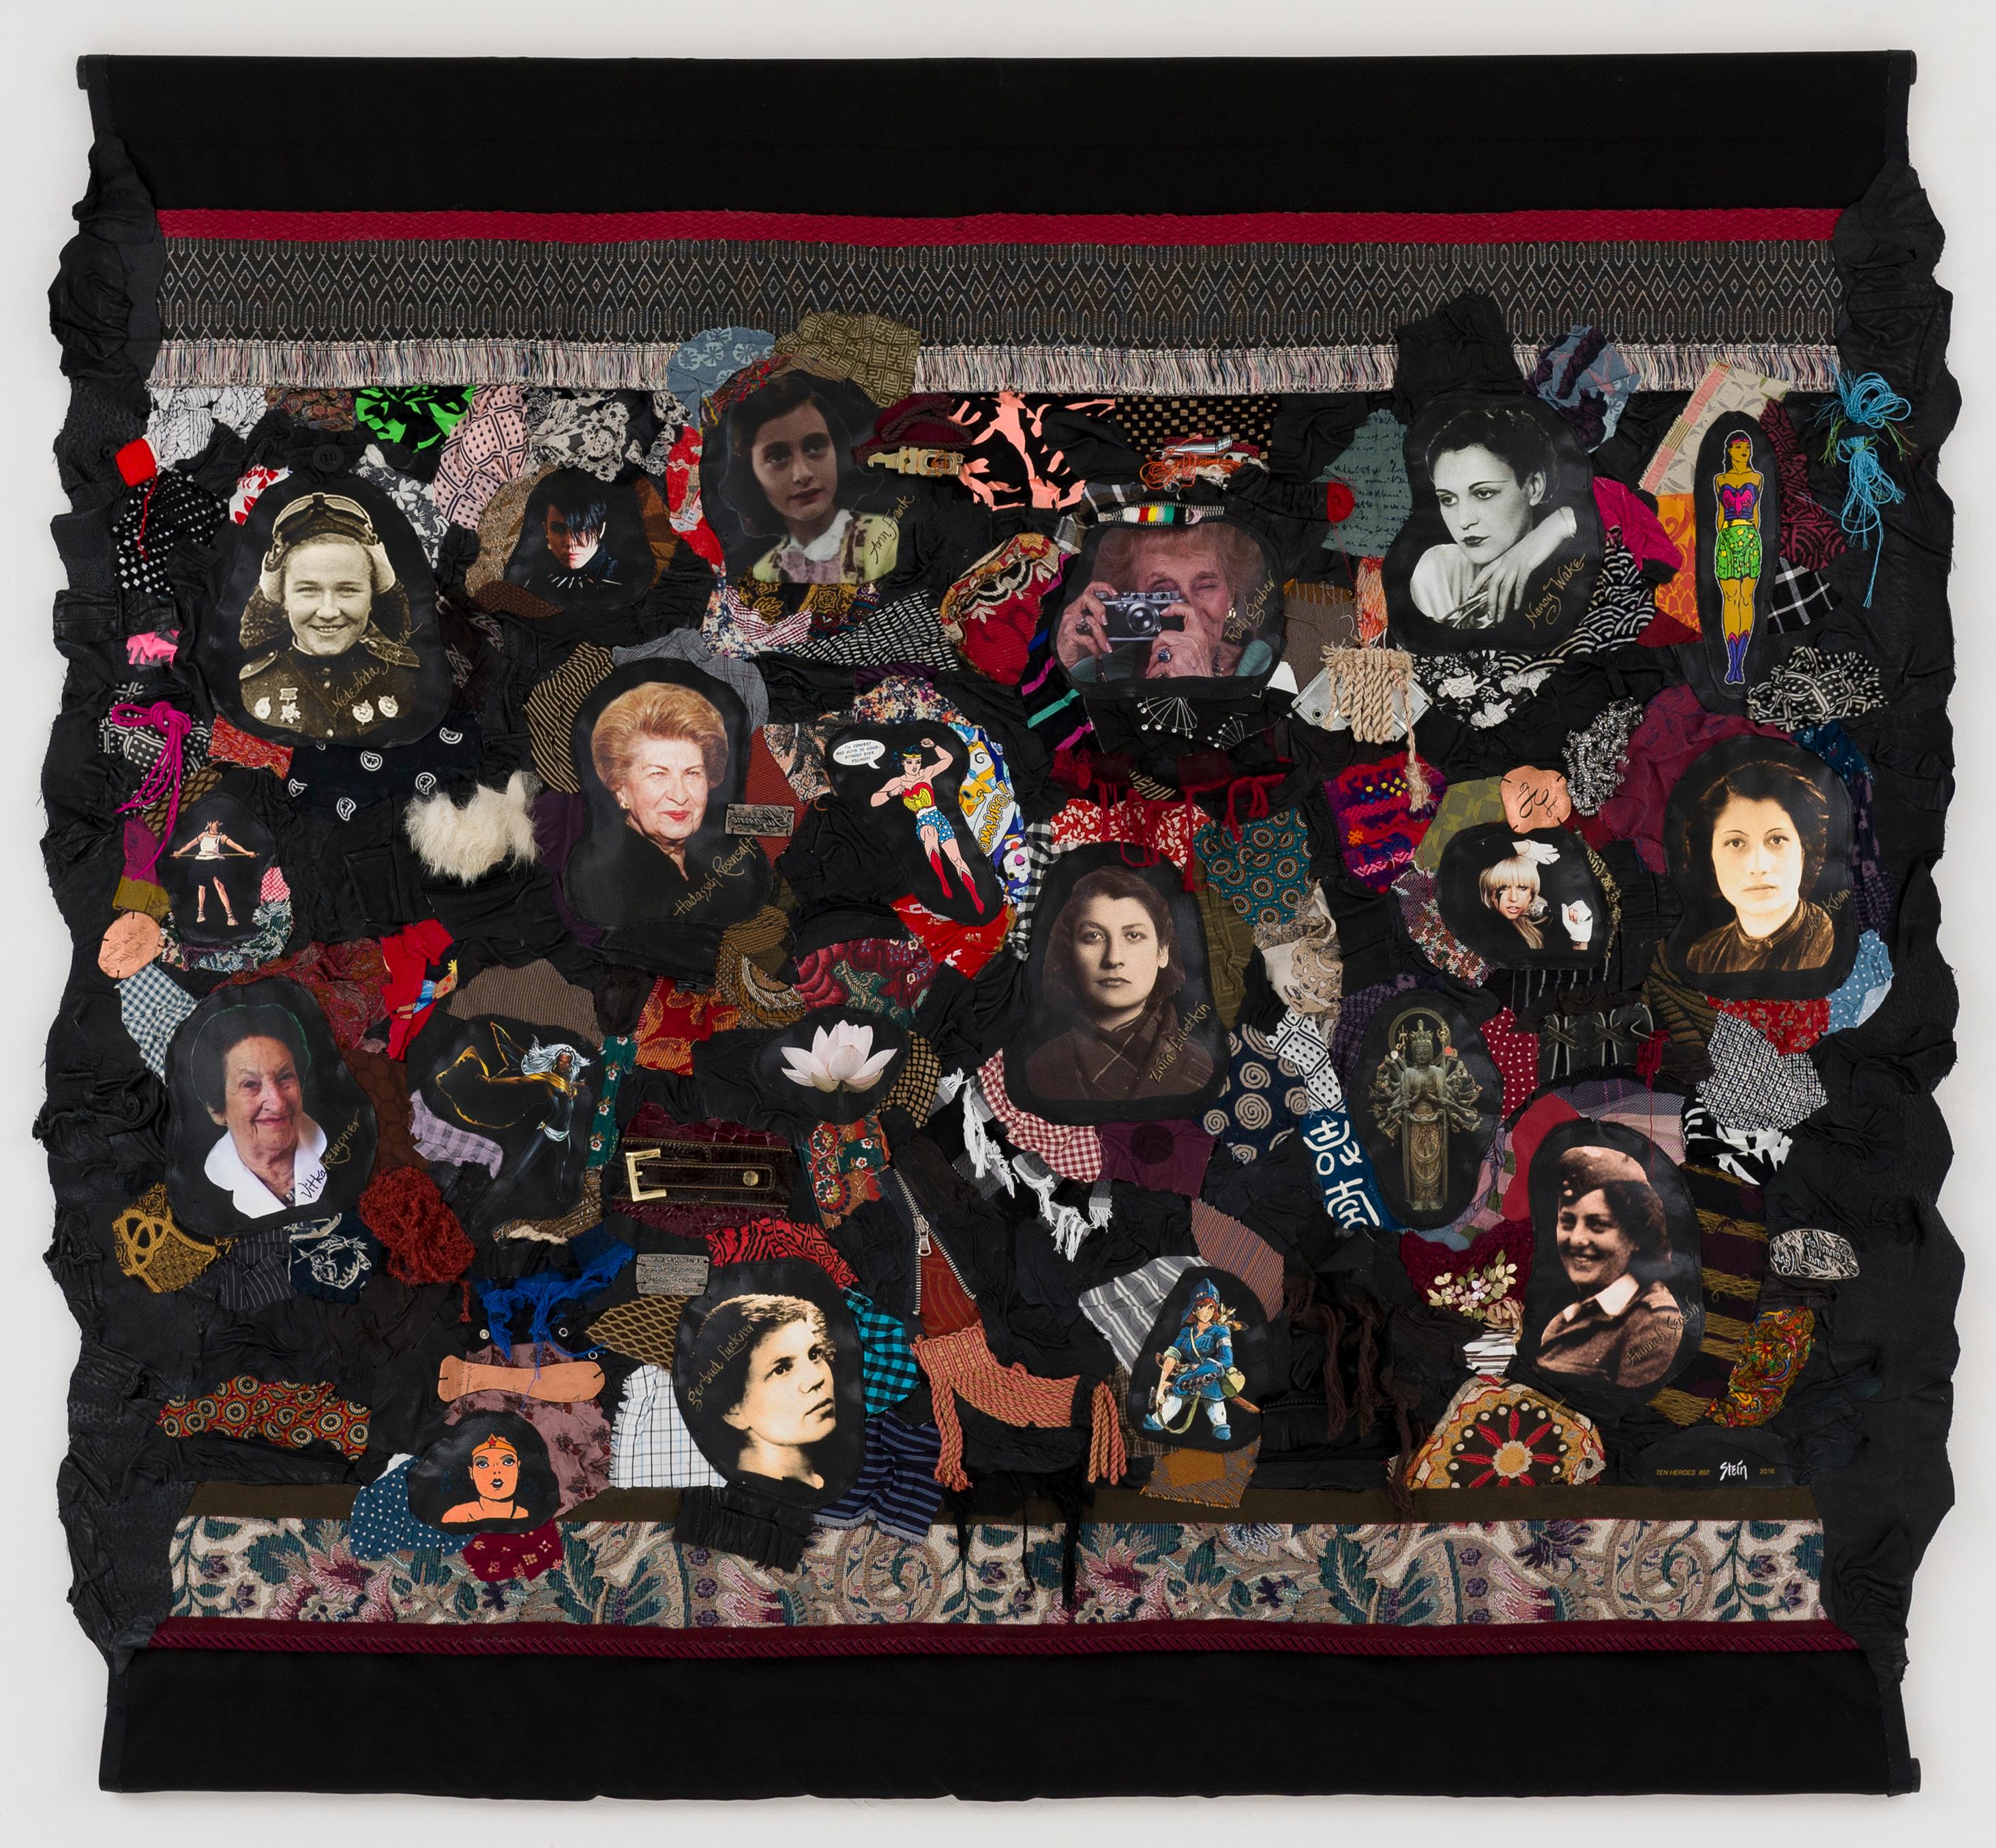 Feministische Contemporary Mixed Media Fabric Sculptural Tapestry - Ten Heroes 882 